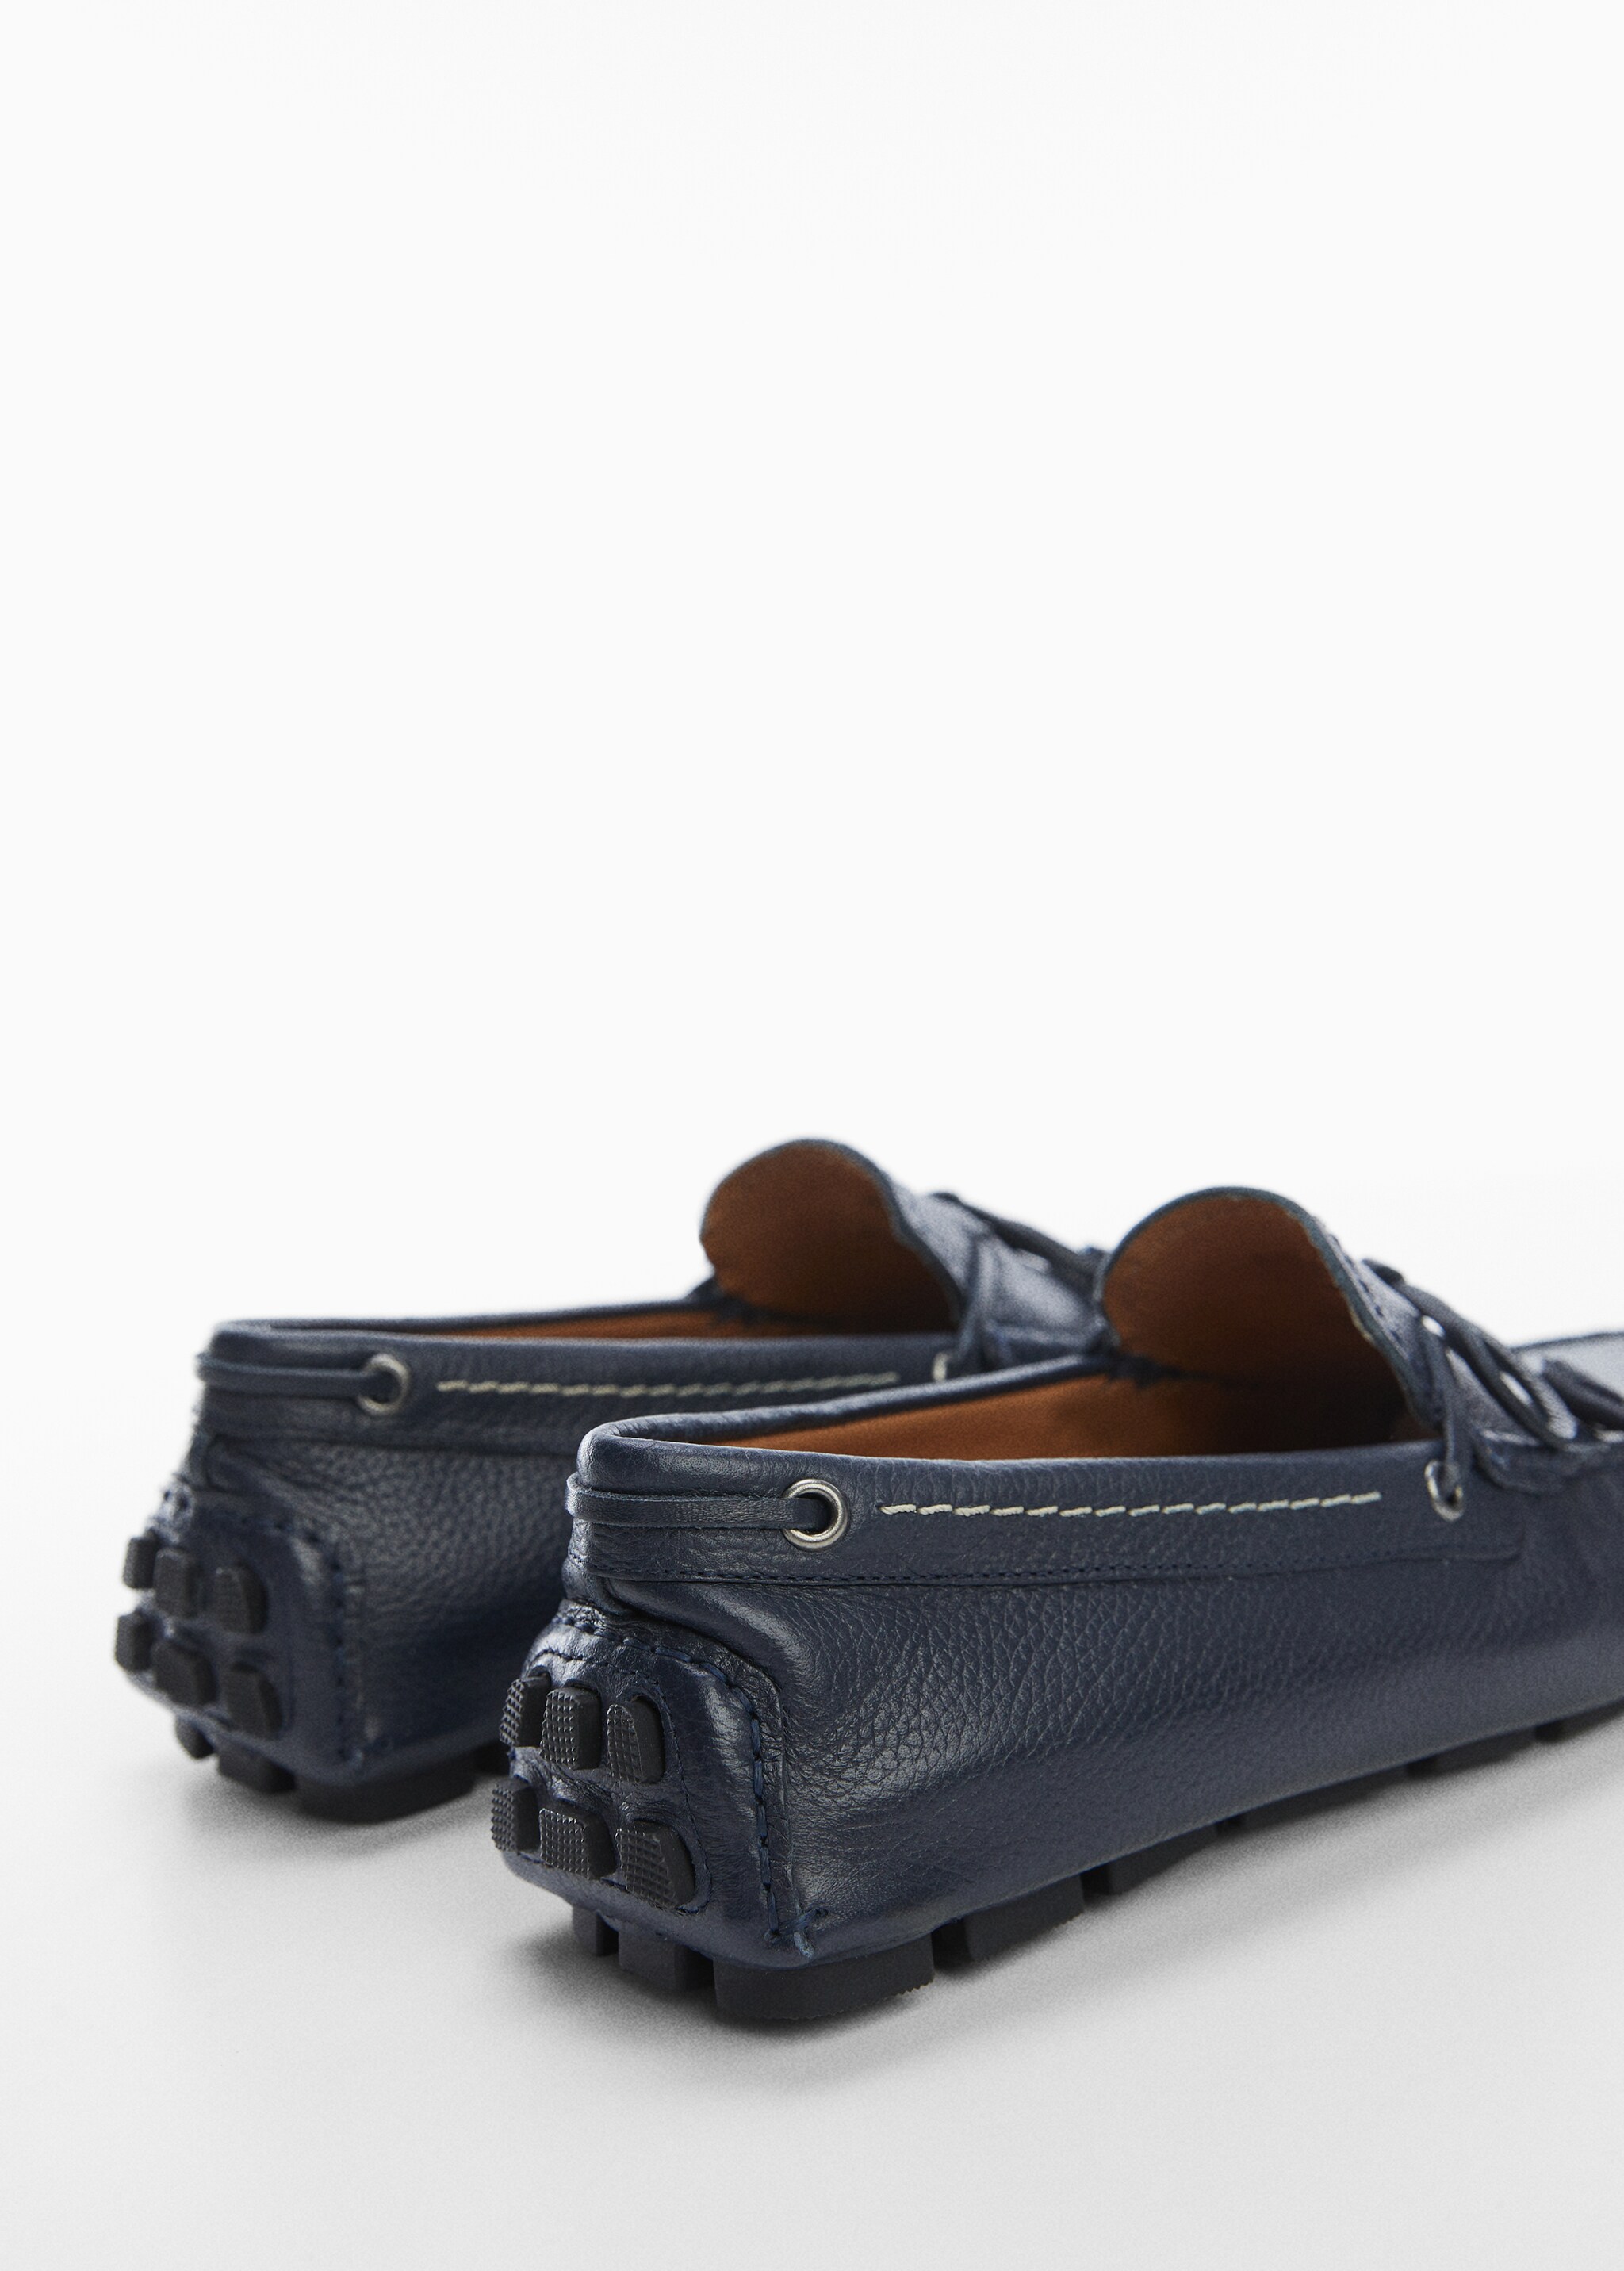 Leather loafers with tassels - Details of the article 2